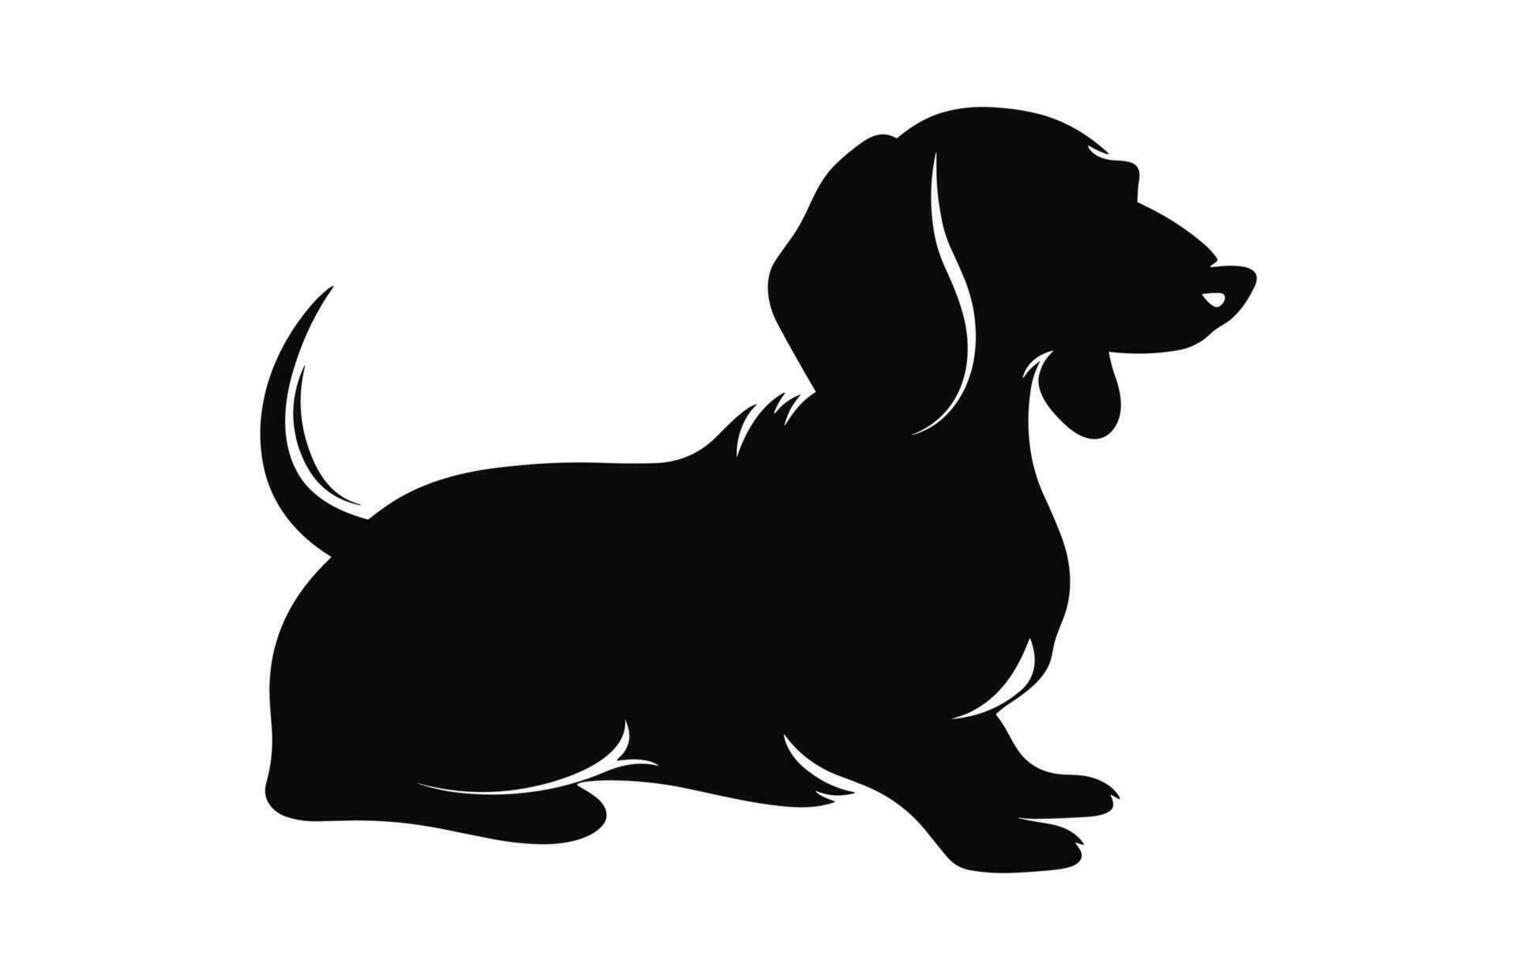 A Dachshund Dog black Silhouette vector isolated on a white background